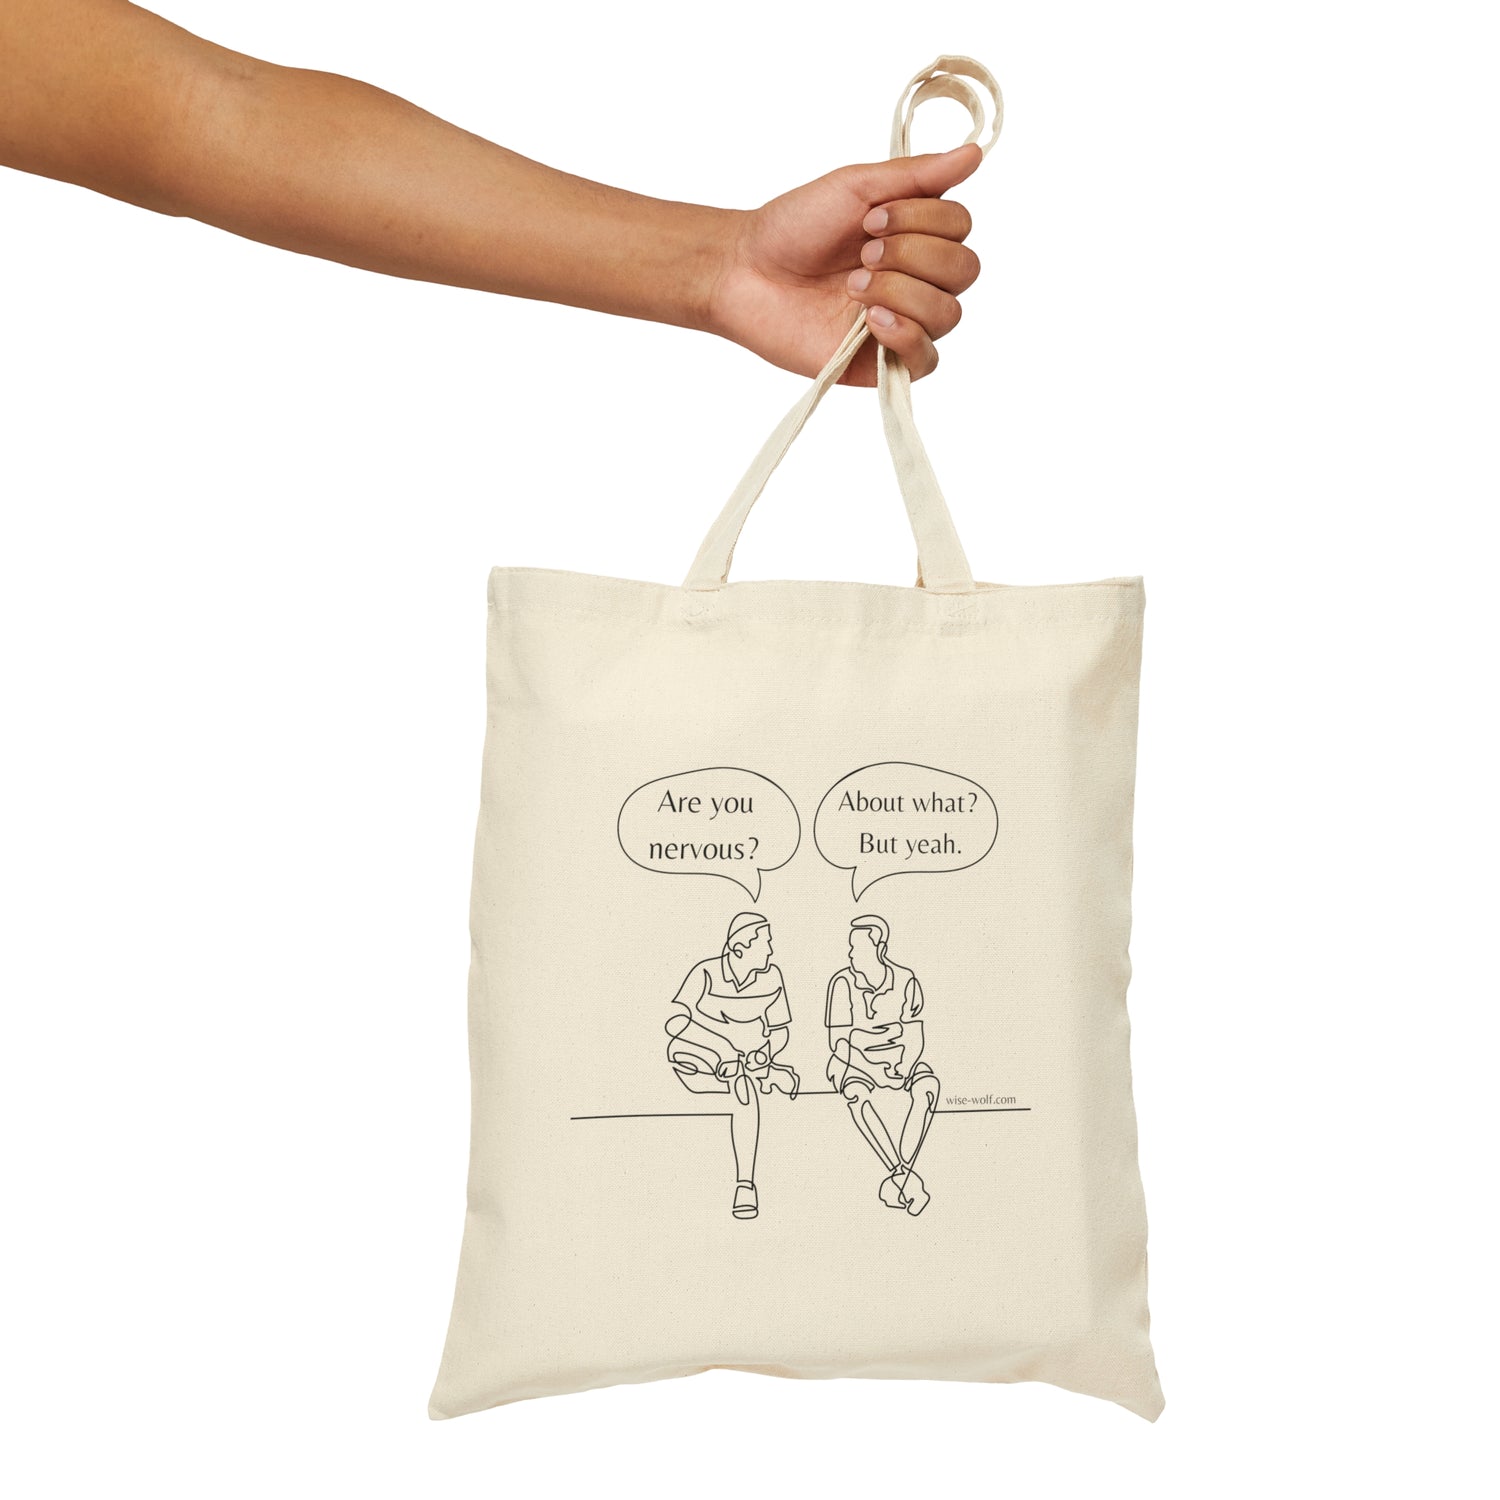 Two people sitting and talking about being nervous on a tote bag